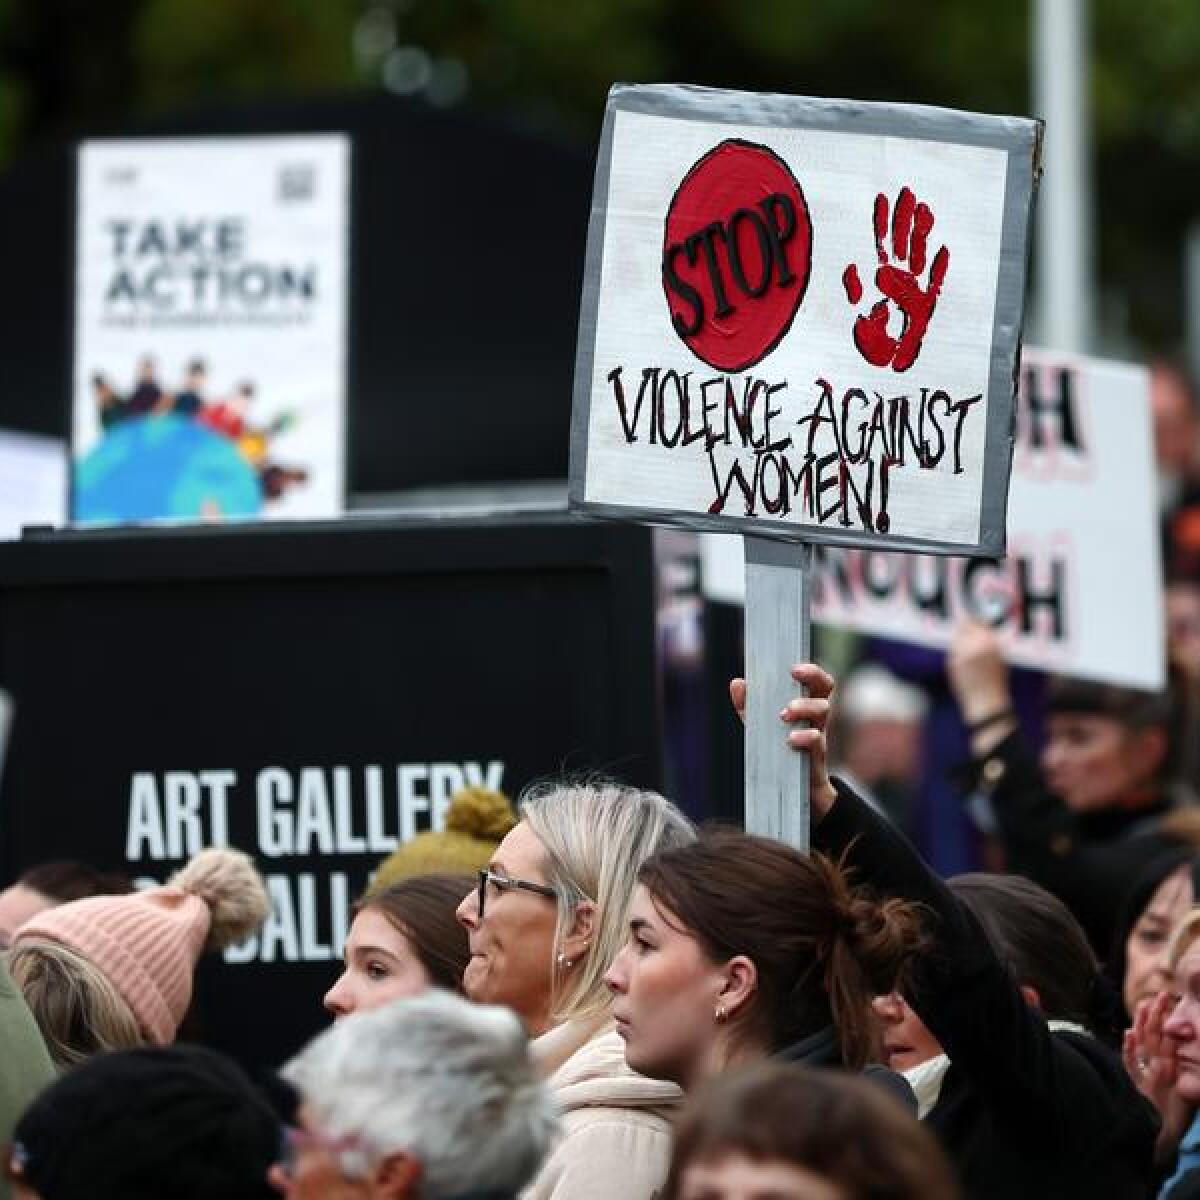 Violence against women rally